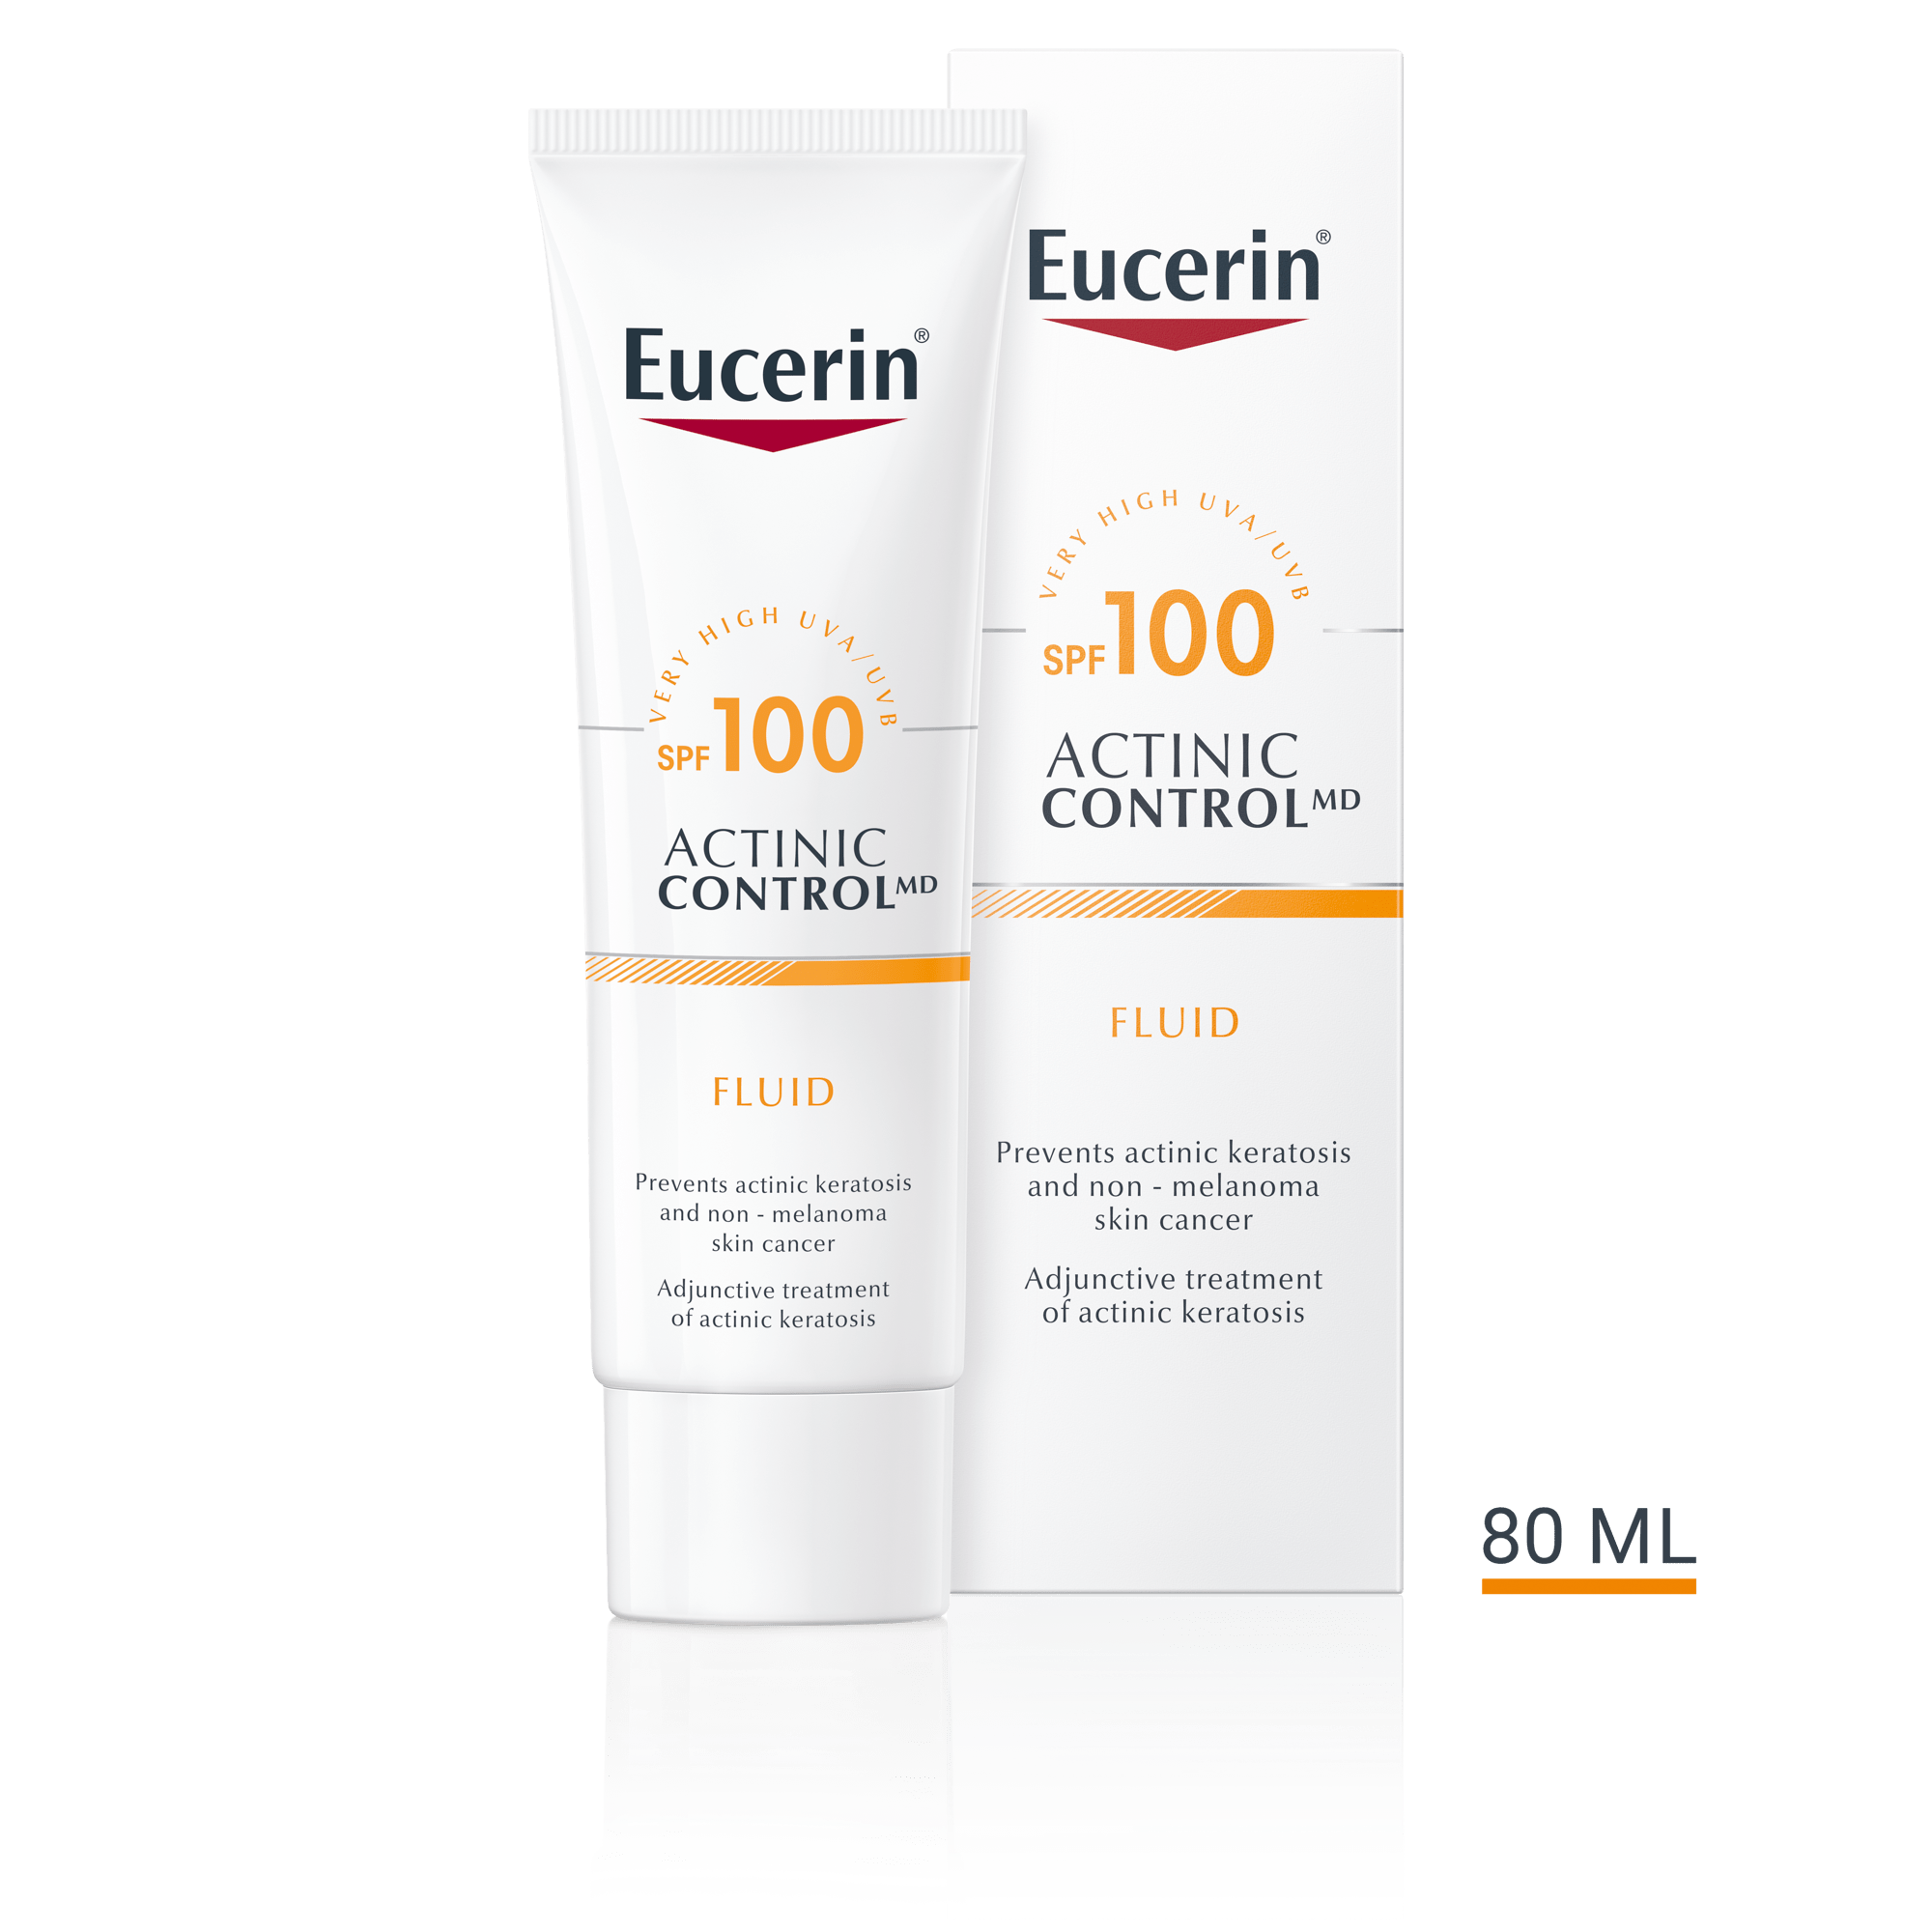 Actinic Control MD SPF100